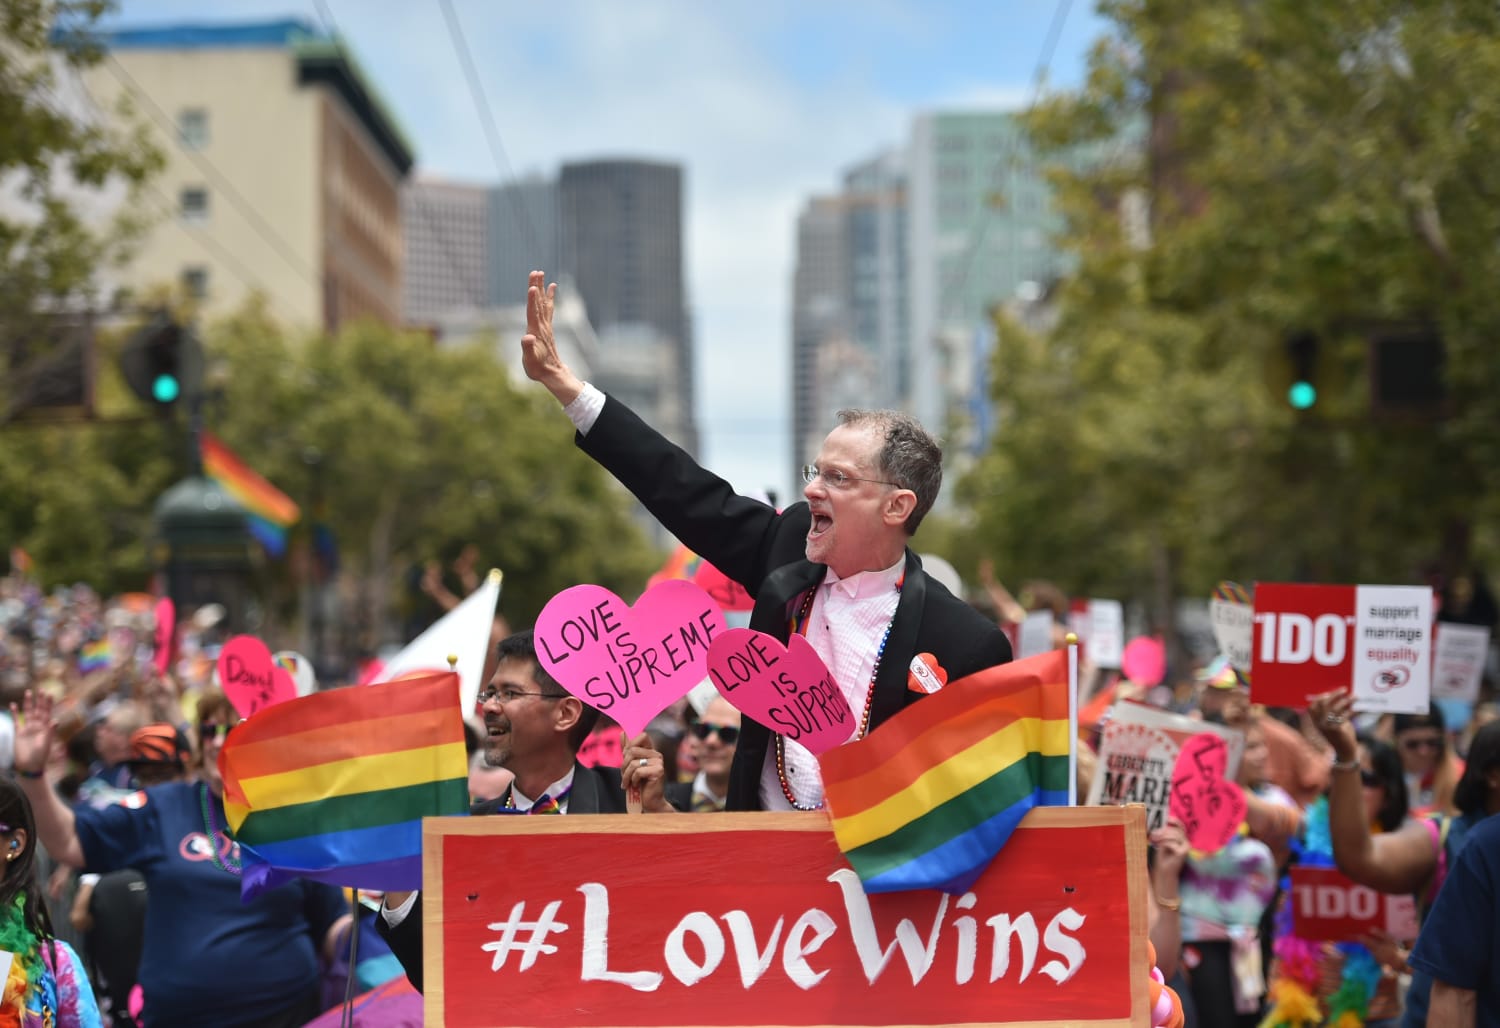 A Year After Marriage Ruling, LGBT Struggles Continue